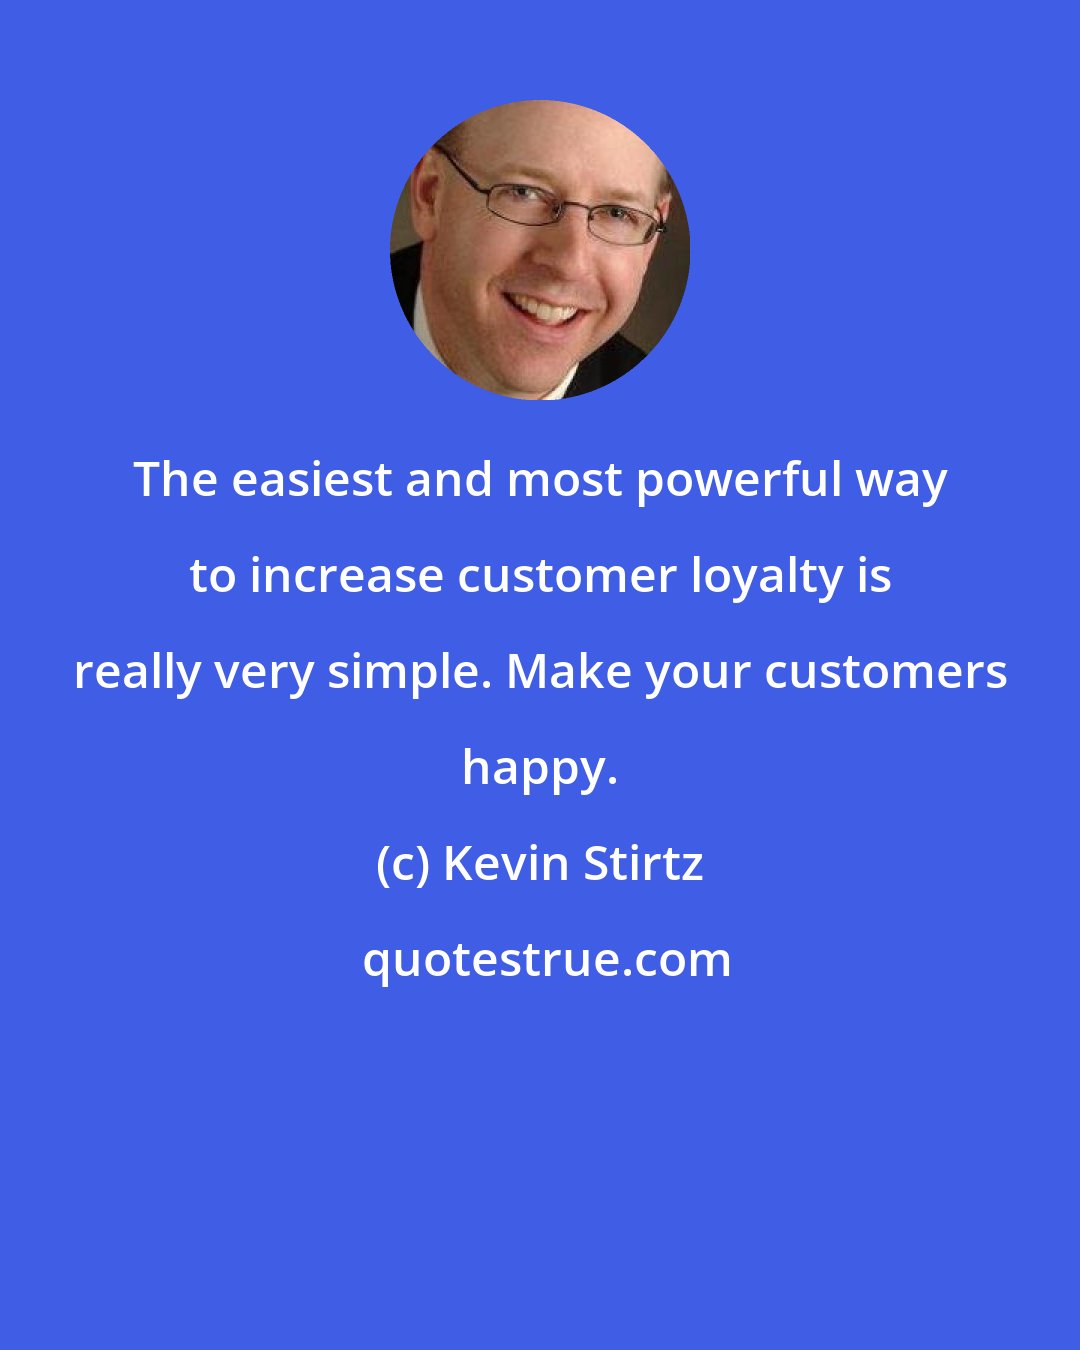 Kevin Stirtz: The easiest and most powerful way to increase customer loyalty is really very simple. Make your customers happy.